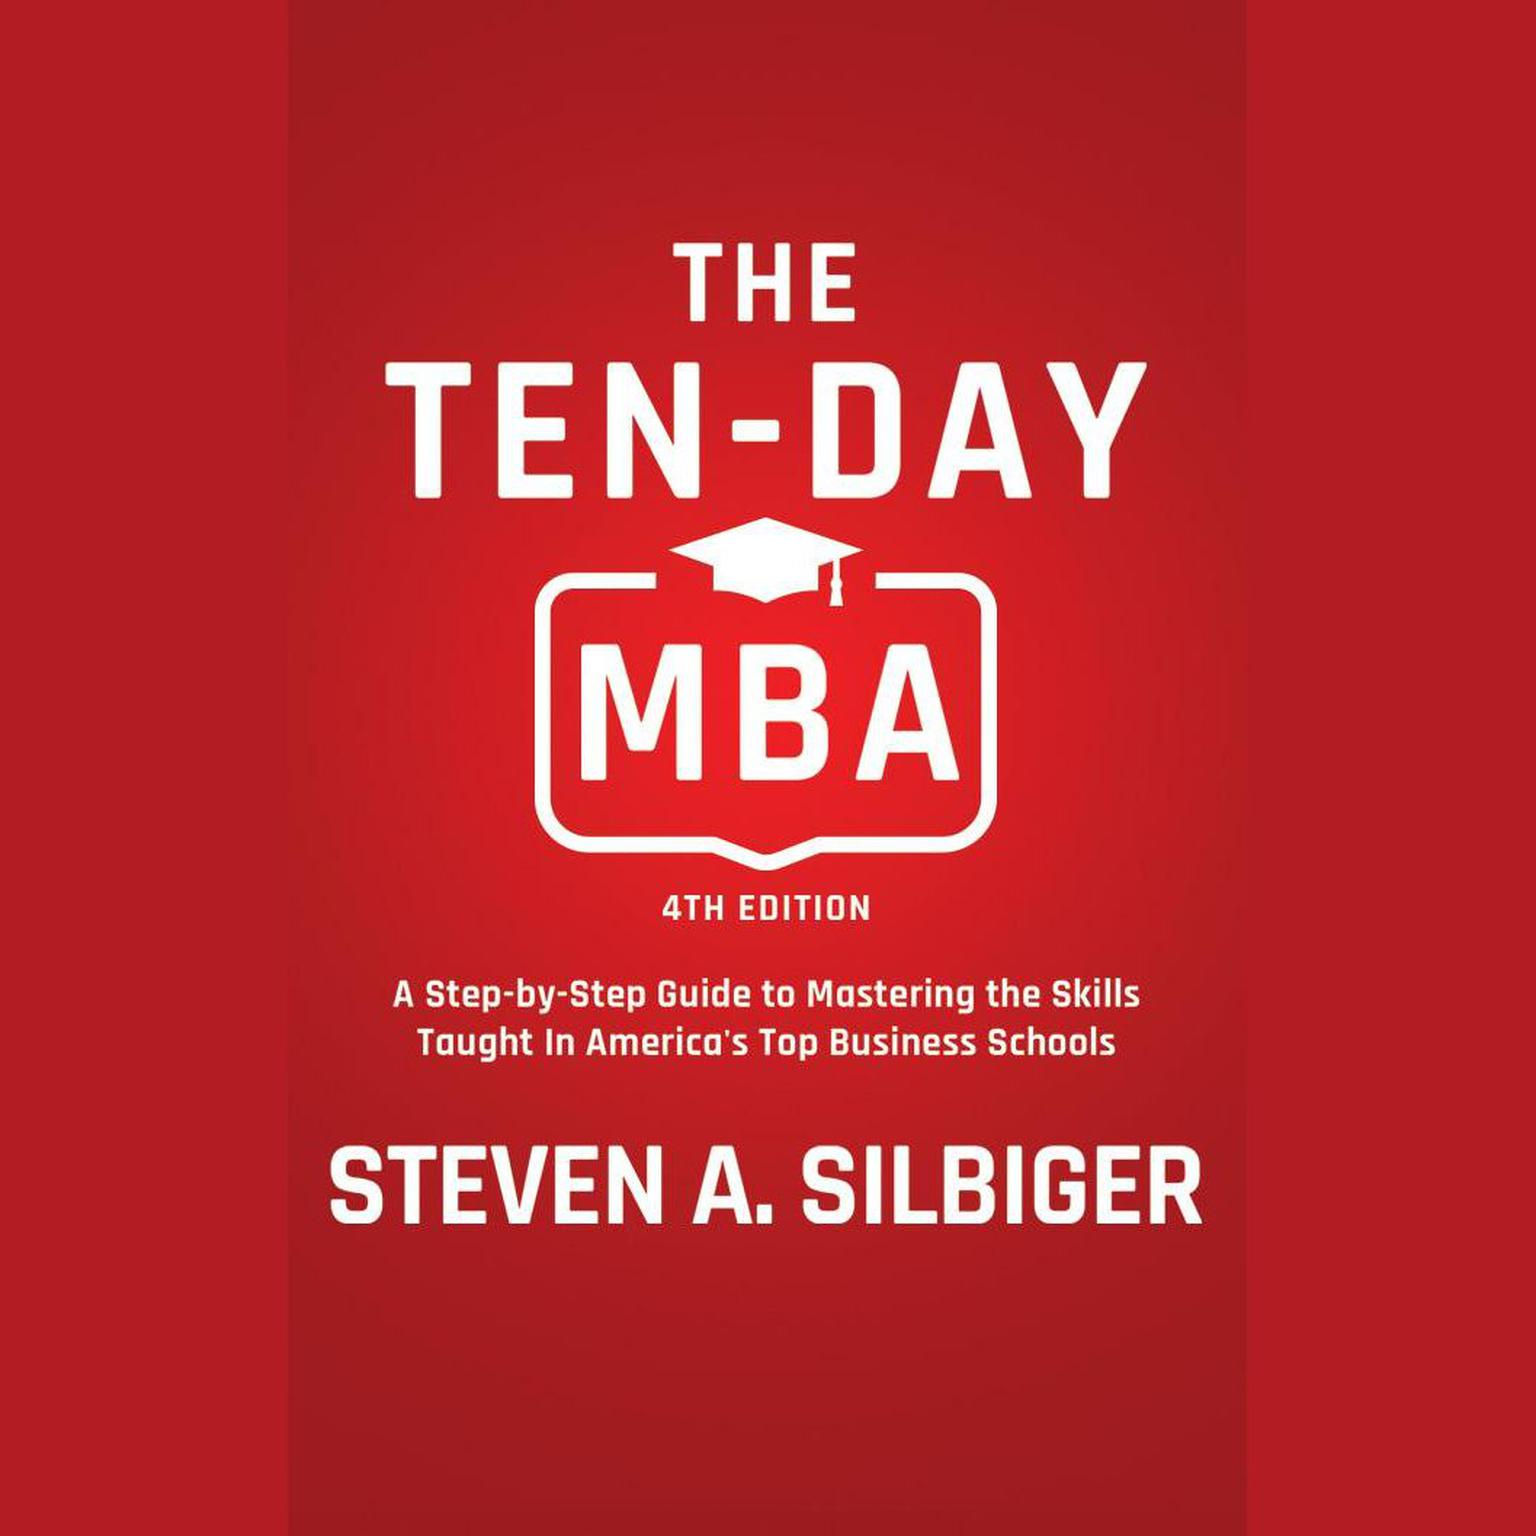 The Ten-Day MBA, 4th Ed.: A Step-by-Step Guide to Mastering the Skills Taught In Americas Top Business Schools Audiobook, by Steven A. Silbiger